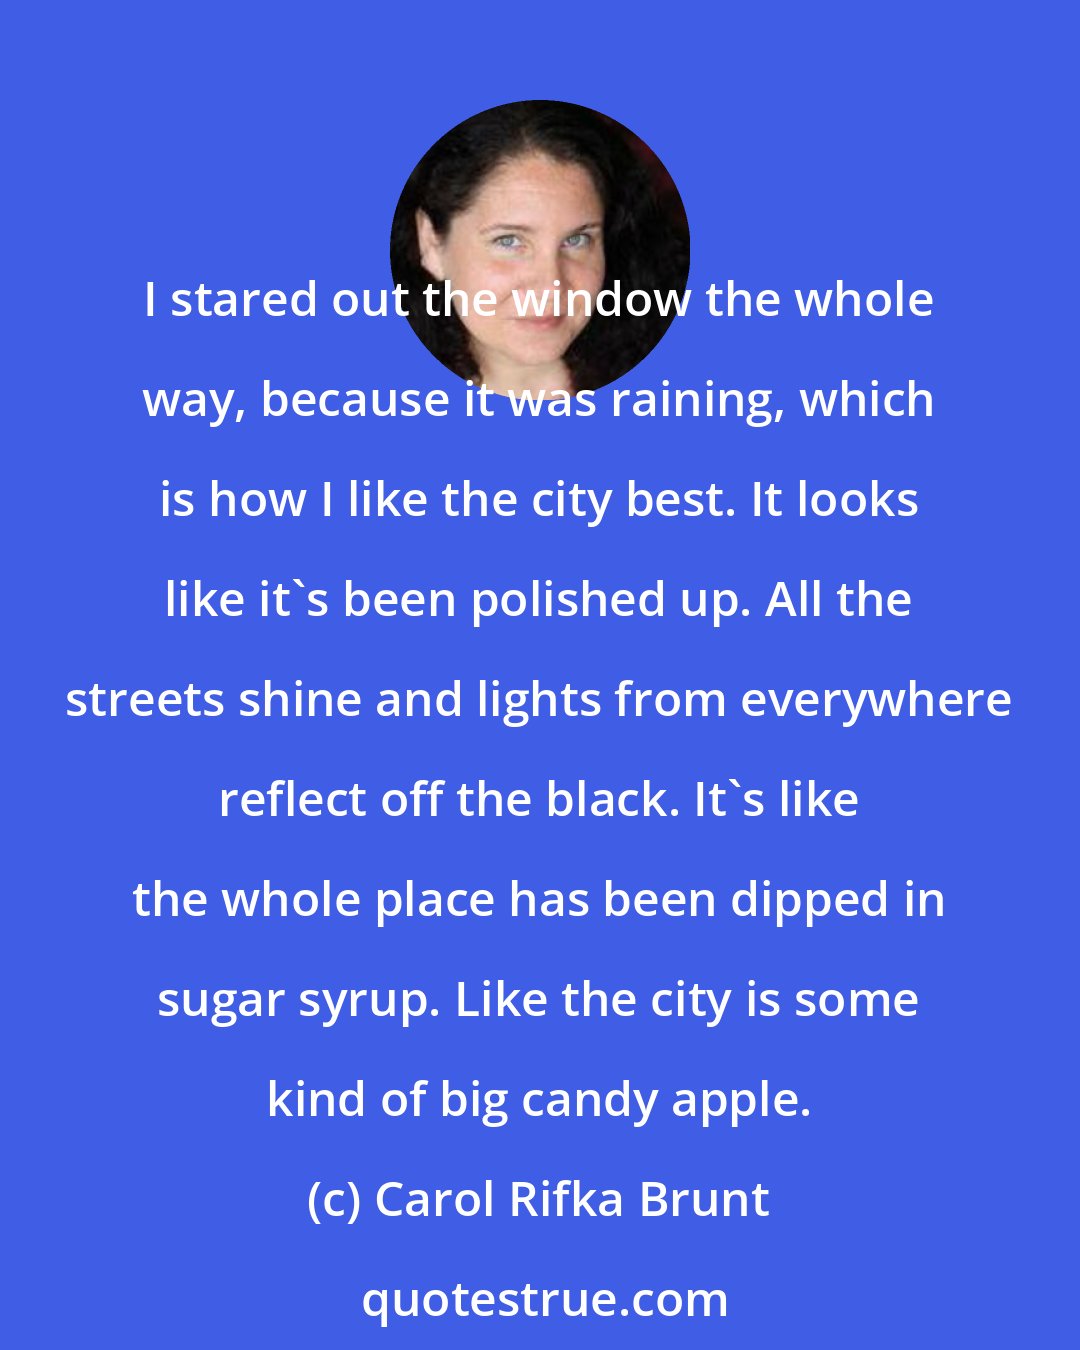 Carol Rifka Brunt: I stared out the window the whole way, because it was raining, which is how I like the city best. It looks like it's been polished up. All the streets shine and lights from everywhere reflect off the black. It's like the whole place has been dipped in sugar syrup. Like the city is some kind of big candy apple.